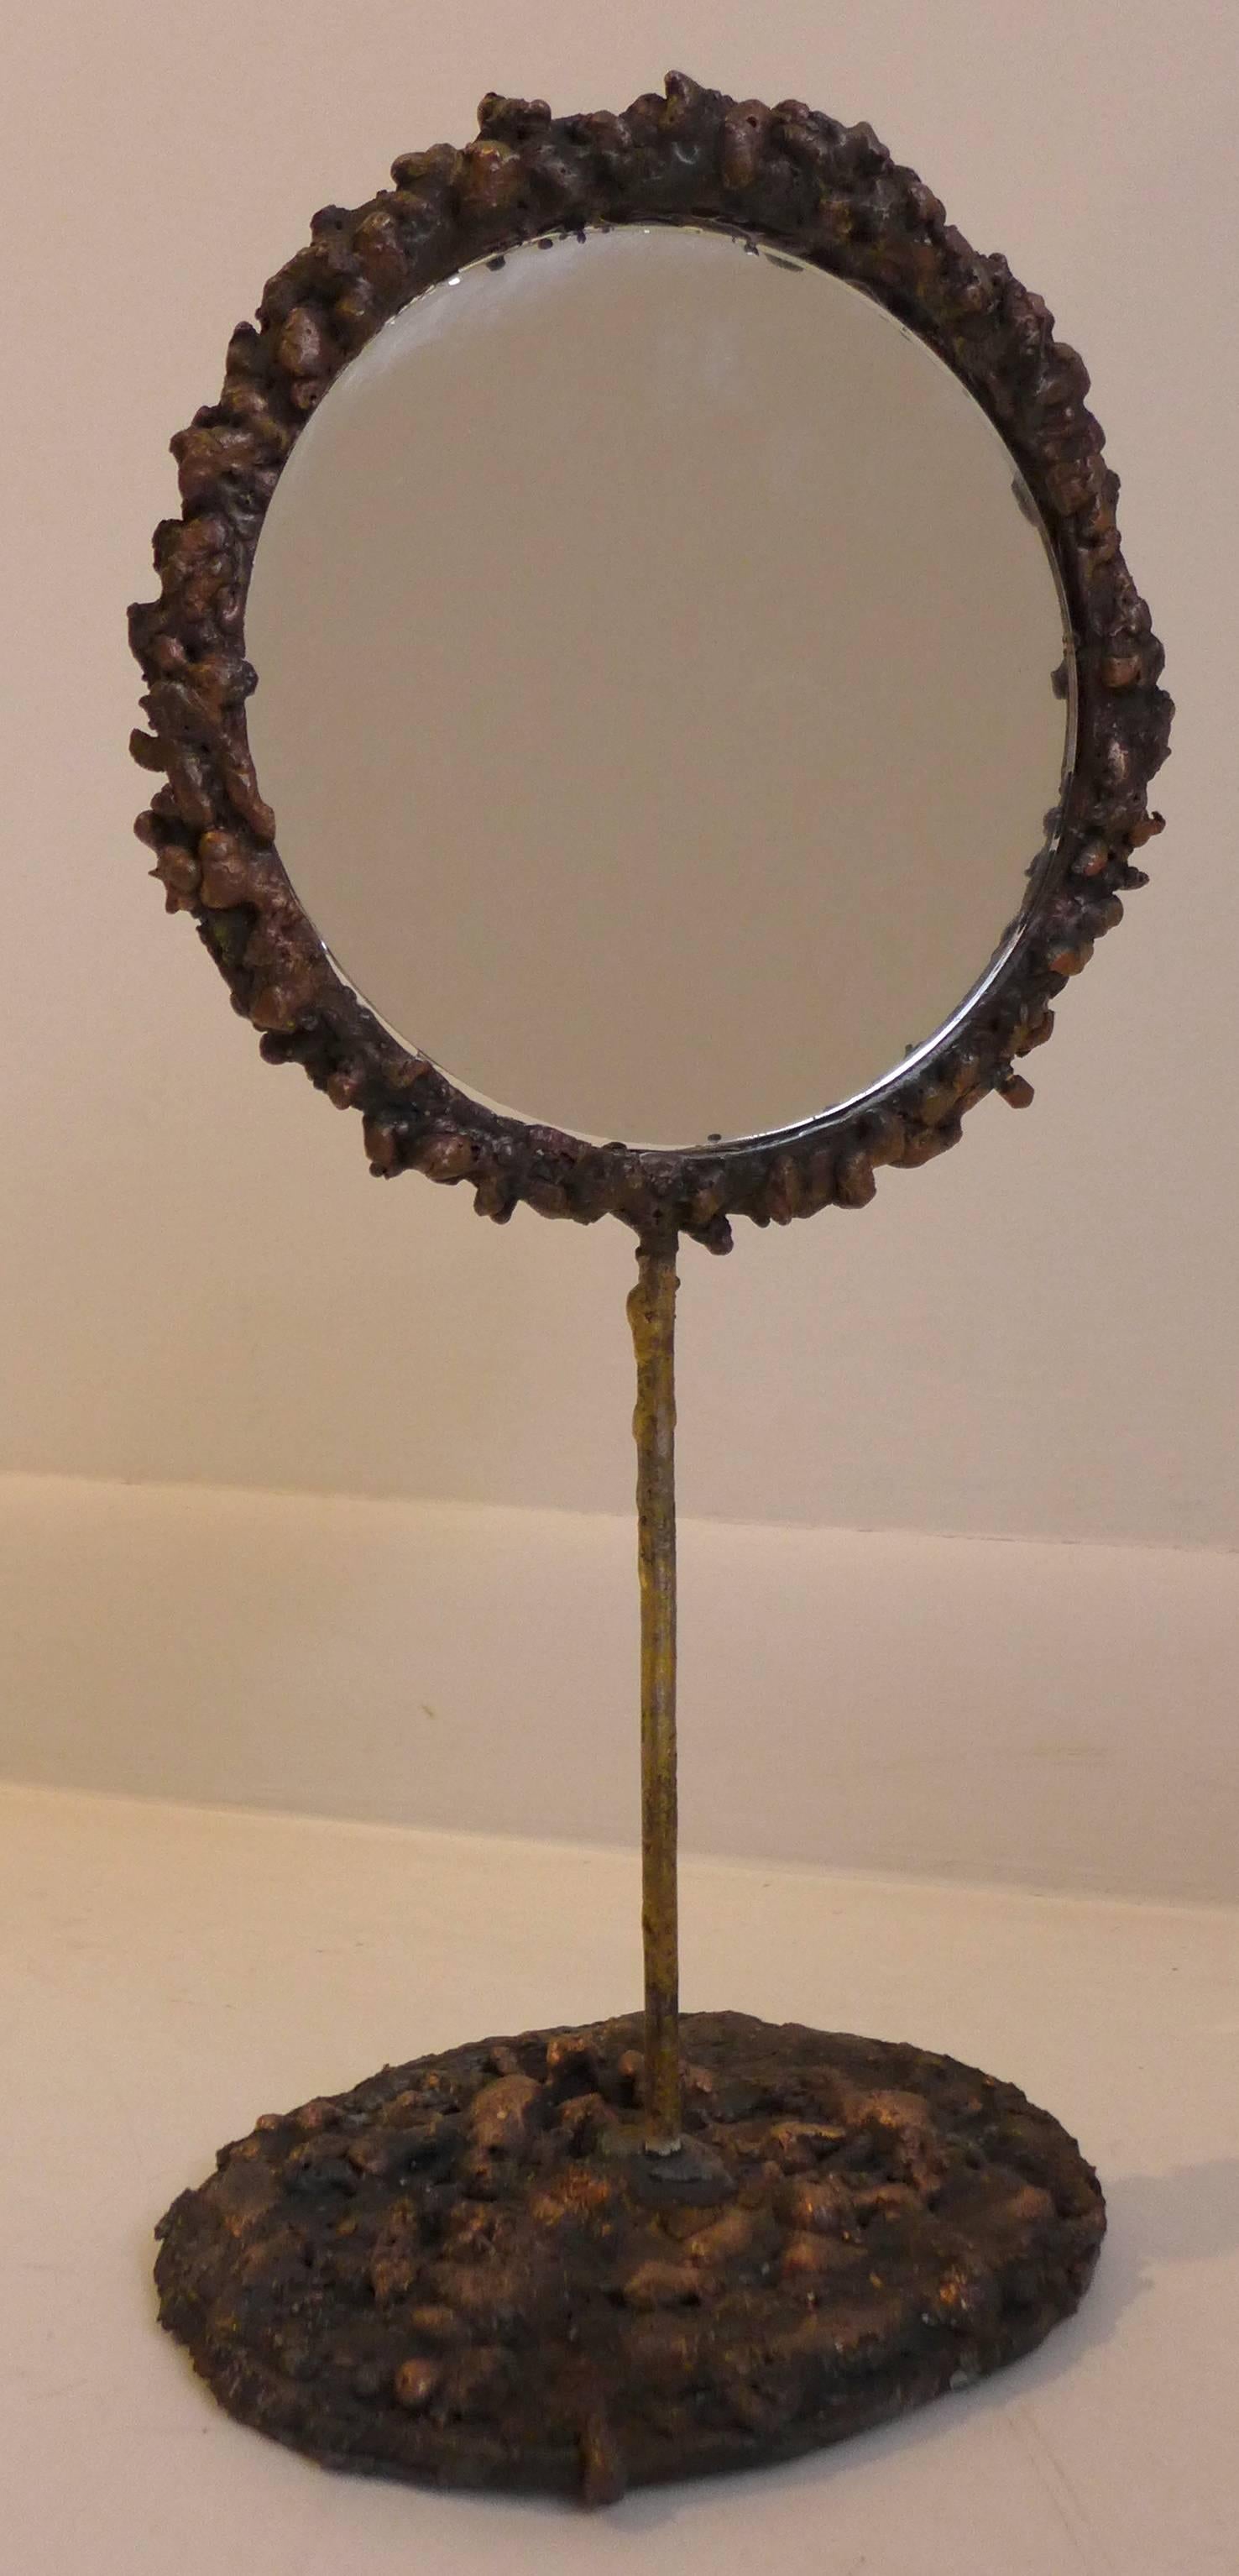 Brutalist double-sided mirror of welded copper by Des Moines, Iowa sculptor James Anthony Bearden. The welded copper ingots form a ring around two pieces of mirrored glass, which are joined via a brass stem to the topographical welded copper base. A